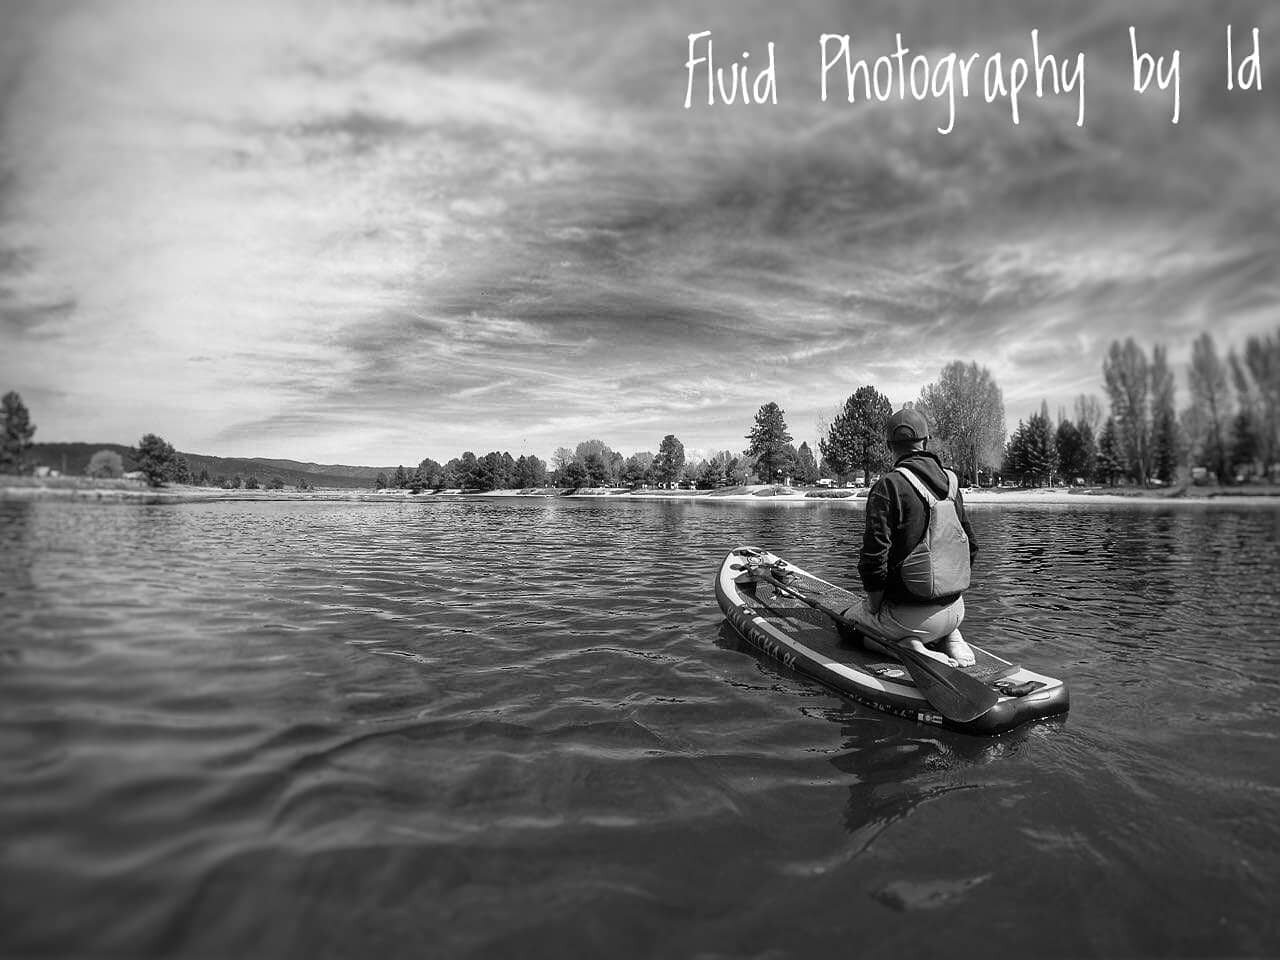 When you are on the water you can feel peace in an unstable world. 

#tranquility #tranquil #outdoors #outdoorphotography #water #nature #float #getoutside #peace #serenity #blackandwhitephotography #sup #standuppaddleboarding #standuppaddleboard #st